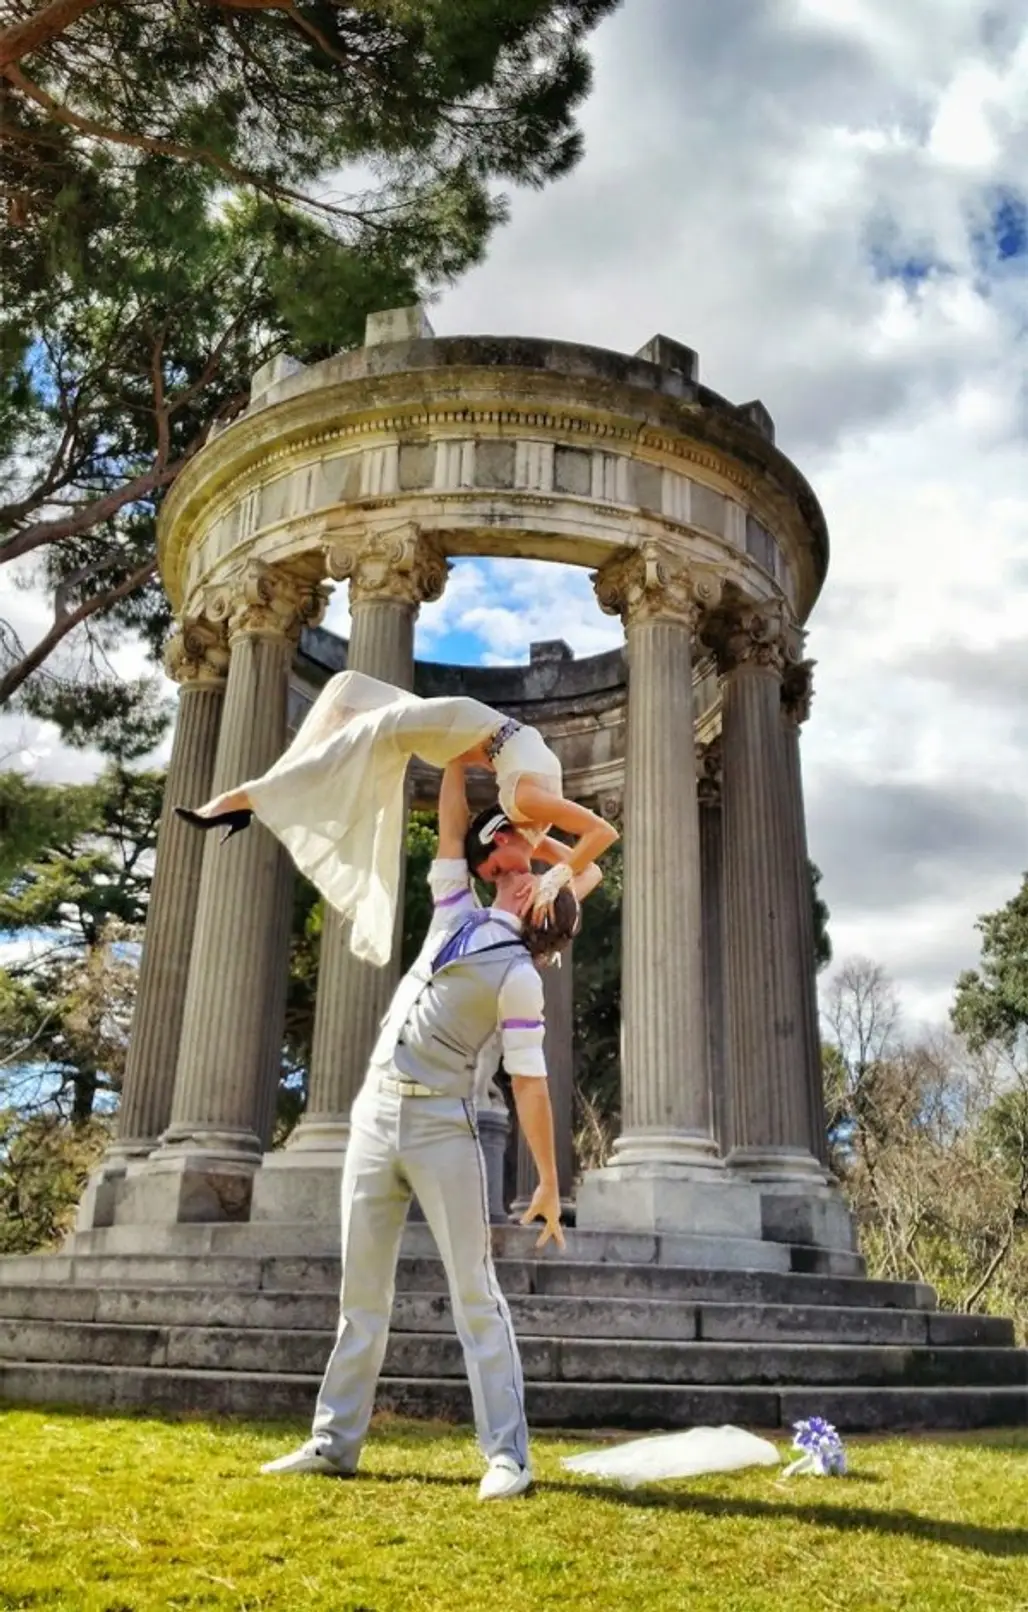 Again in Spain, This Time It's Capricho Park in Madrid